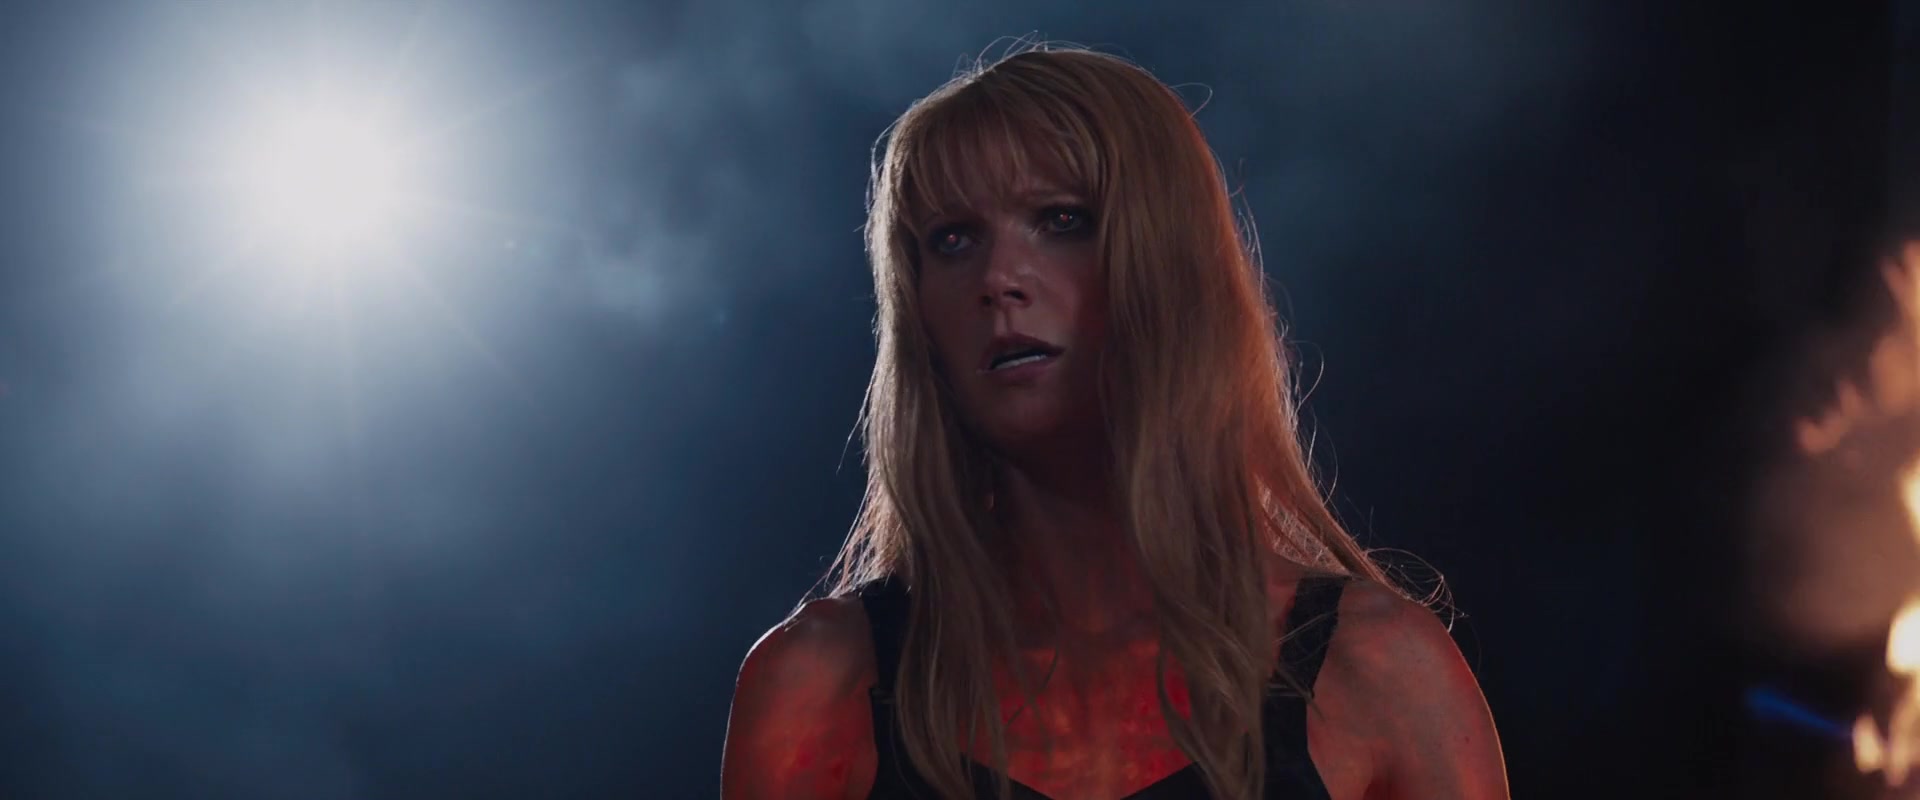 Pepper Potts (Gwenyth Paltrow) finds herself infected with Extremis tech in Iron Man 3 (2013), Marvel Entertainment